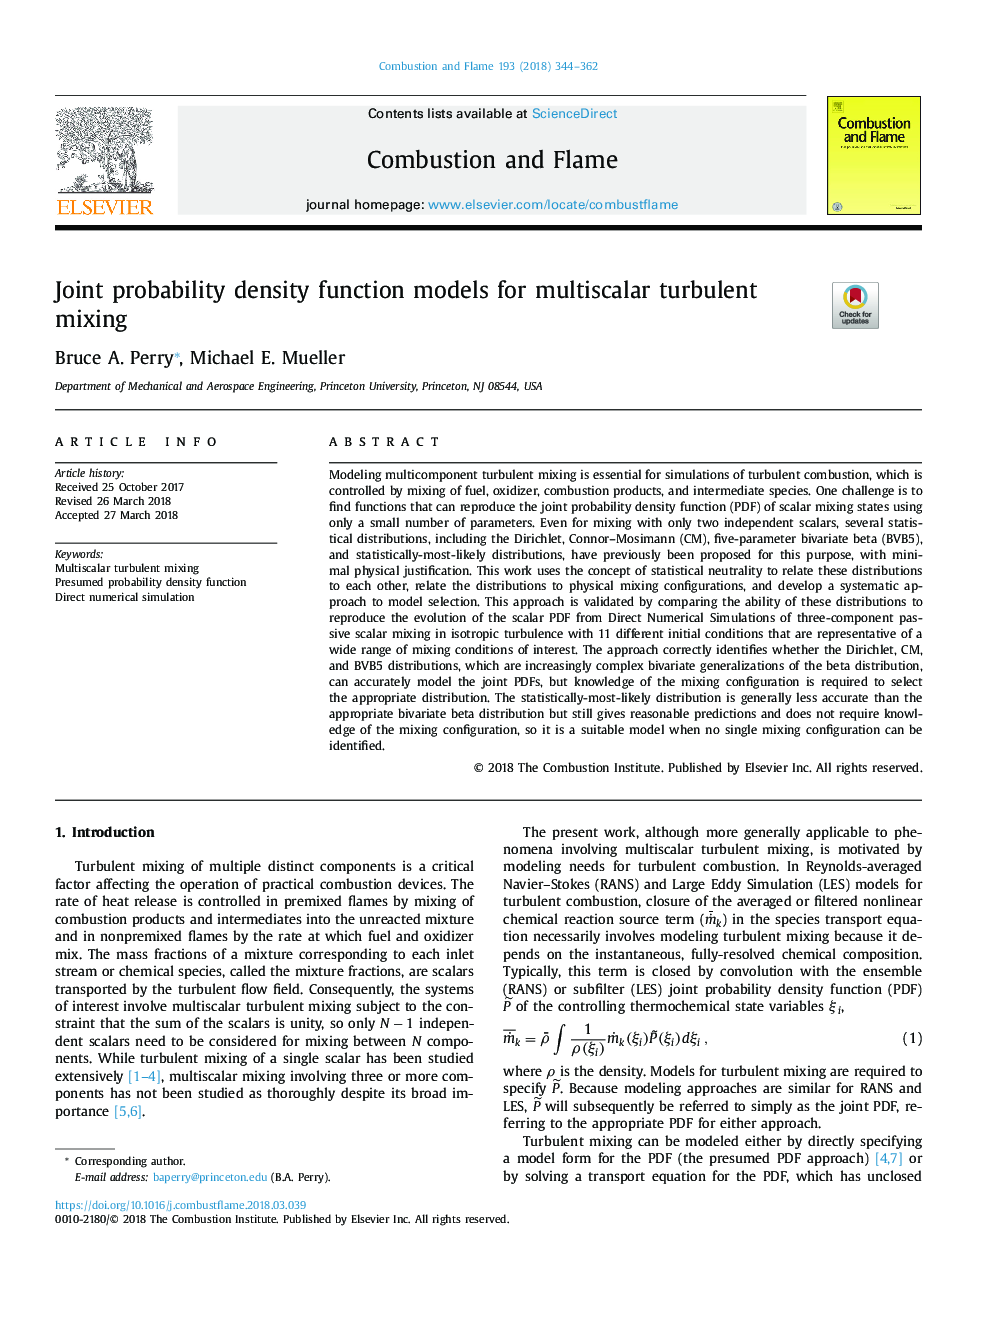 Joint probability density function models for multiscalar turbulent mixing